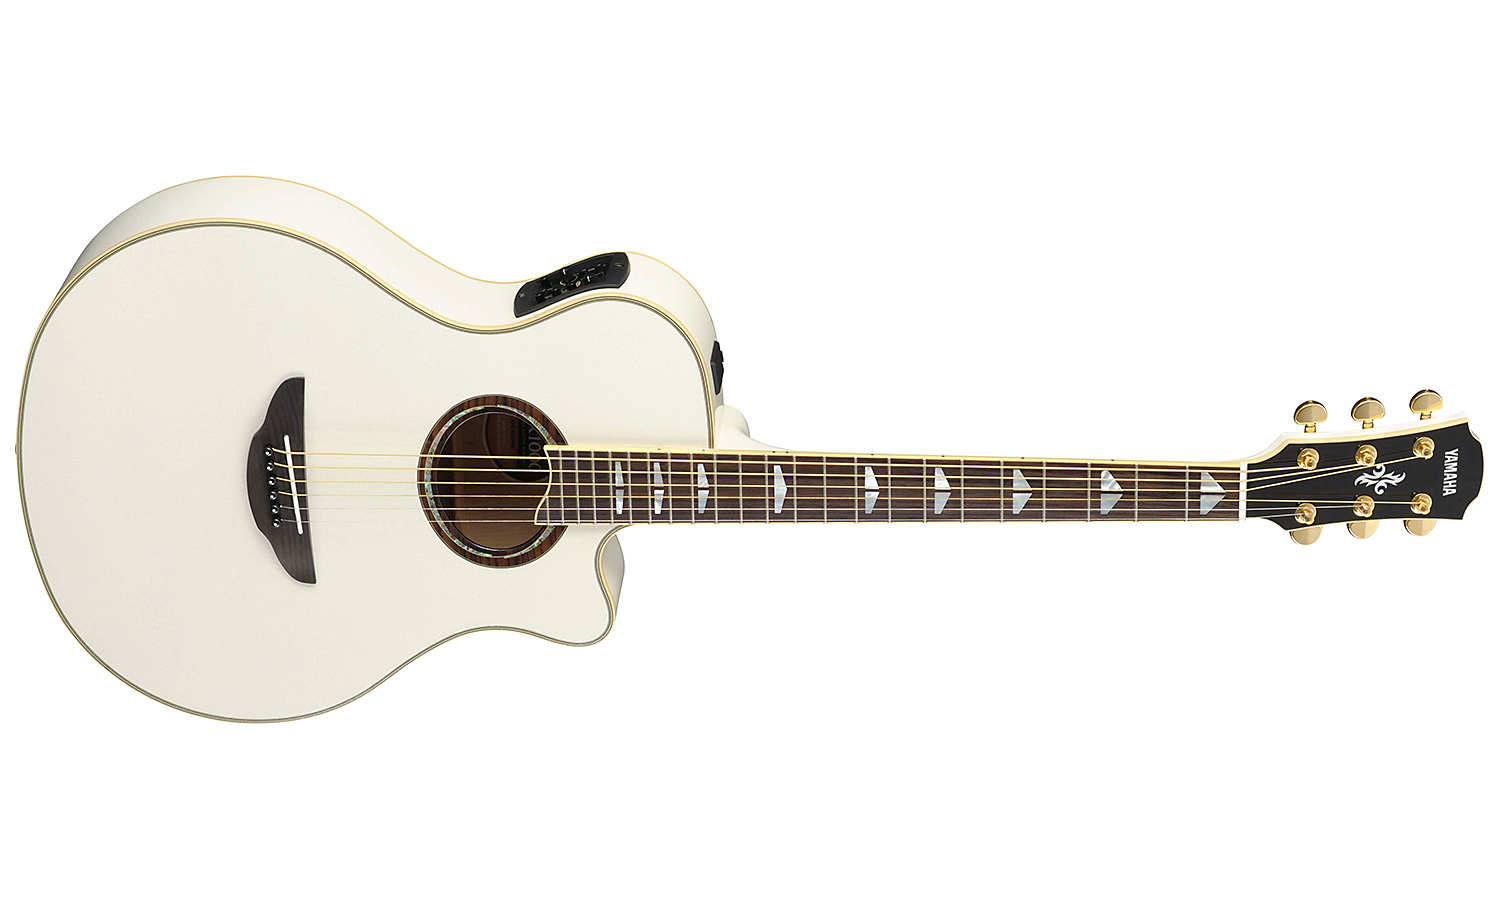 Yamaha Apx1000 Pearl White - Pearl White - Guitare Electro Acoustique - Variation 1